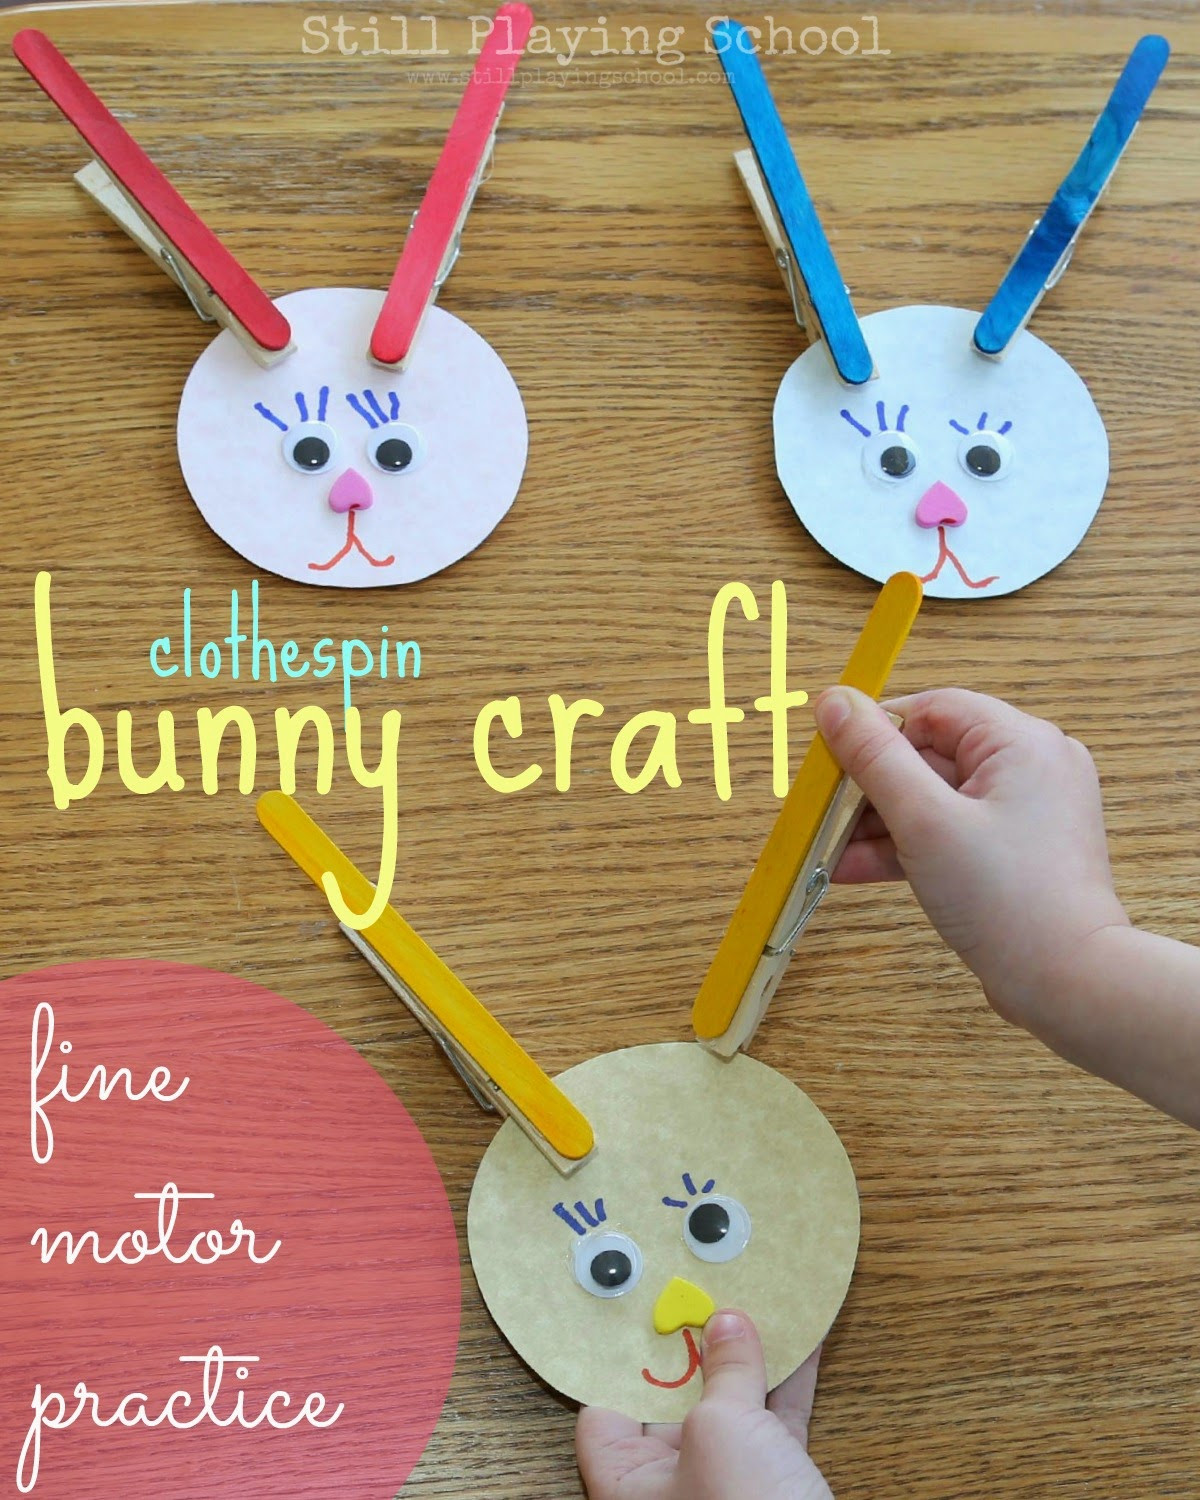 Easy Craft Ideas For Toddlers
 11 Easy Craft Ideas For Kids That Are Perfect for Parties